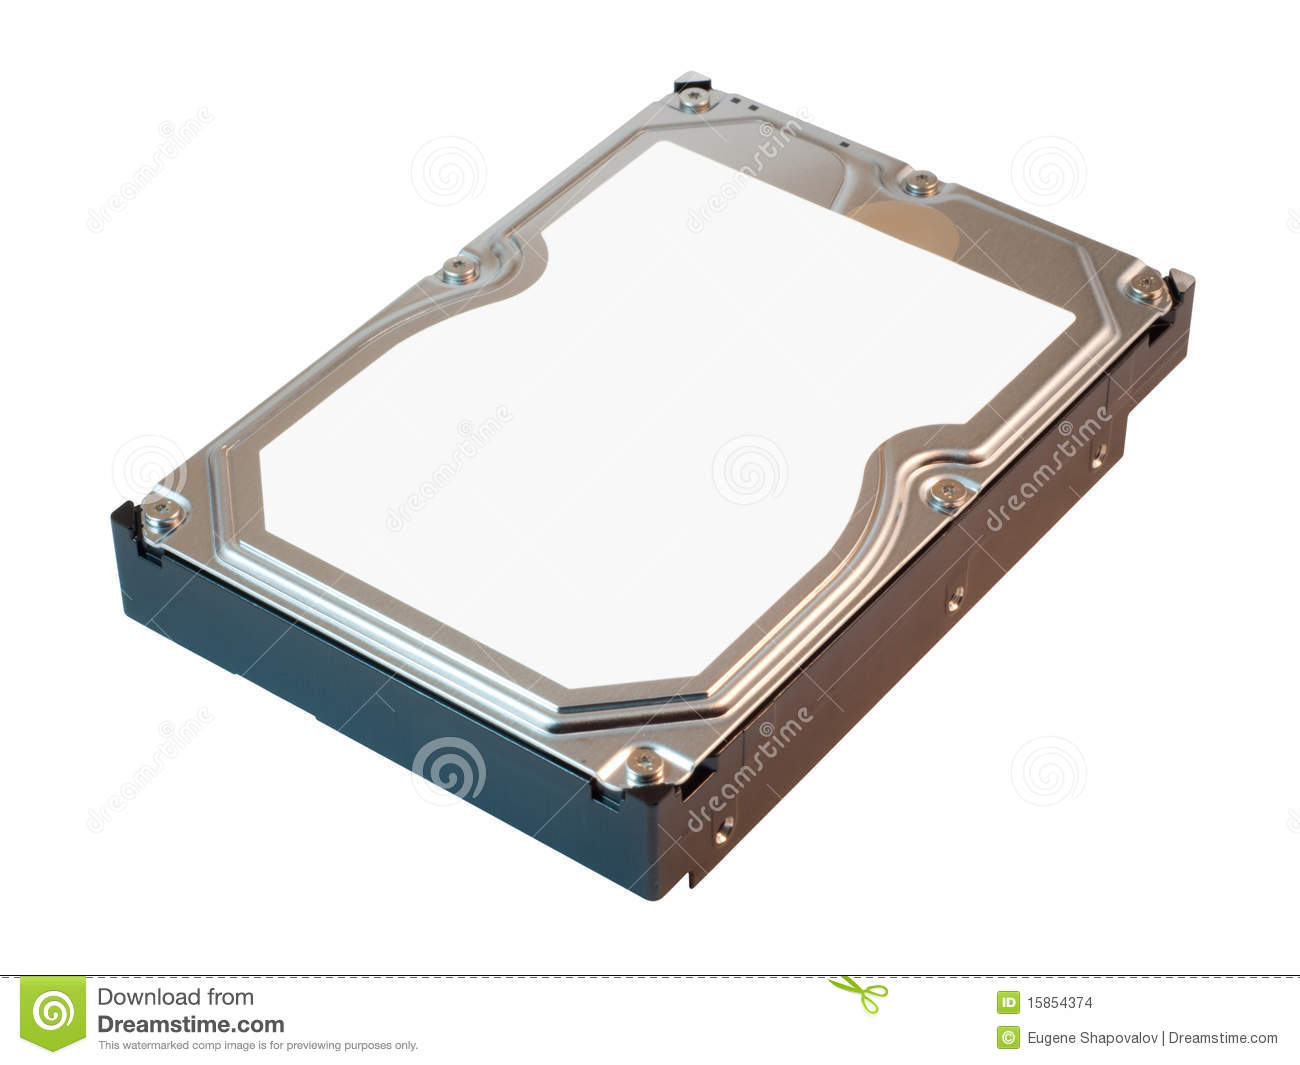 Hard Disk Drive  Hdd  Isolated On White Background With Clipping Path